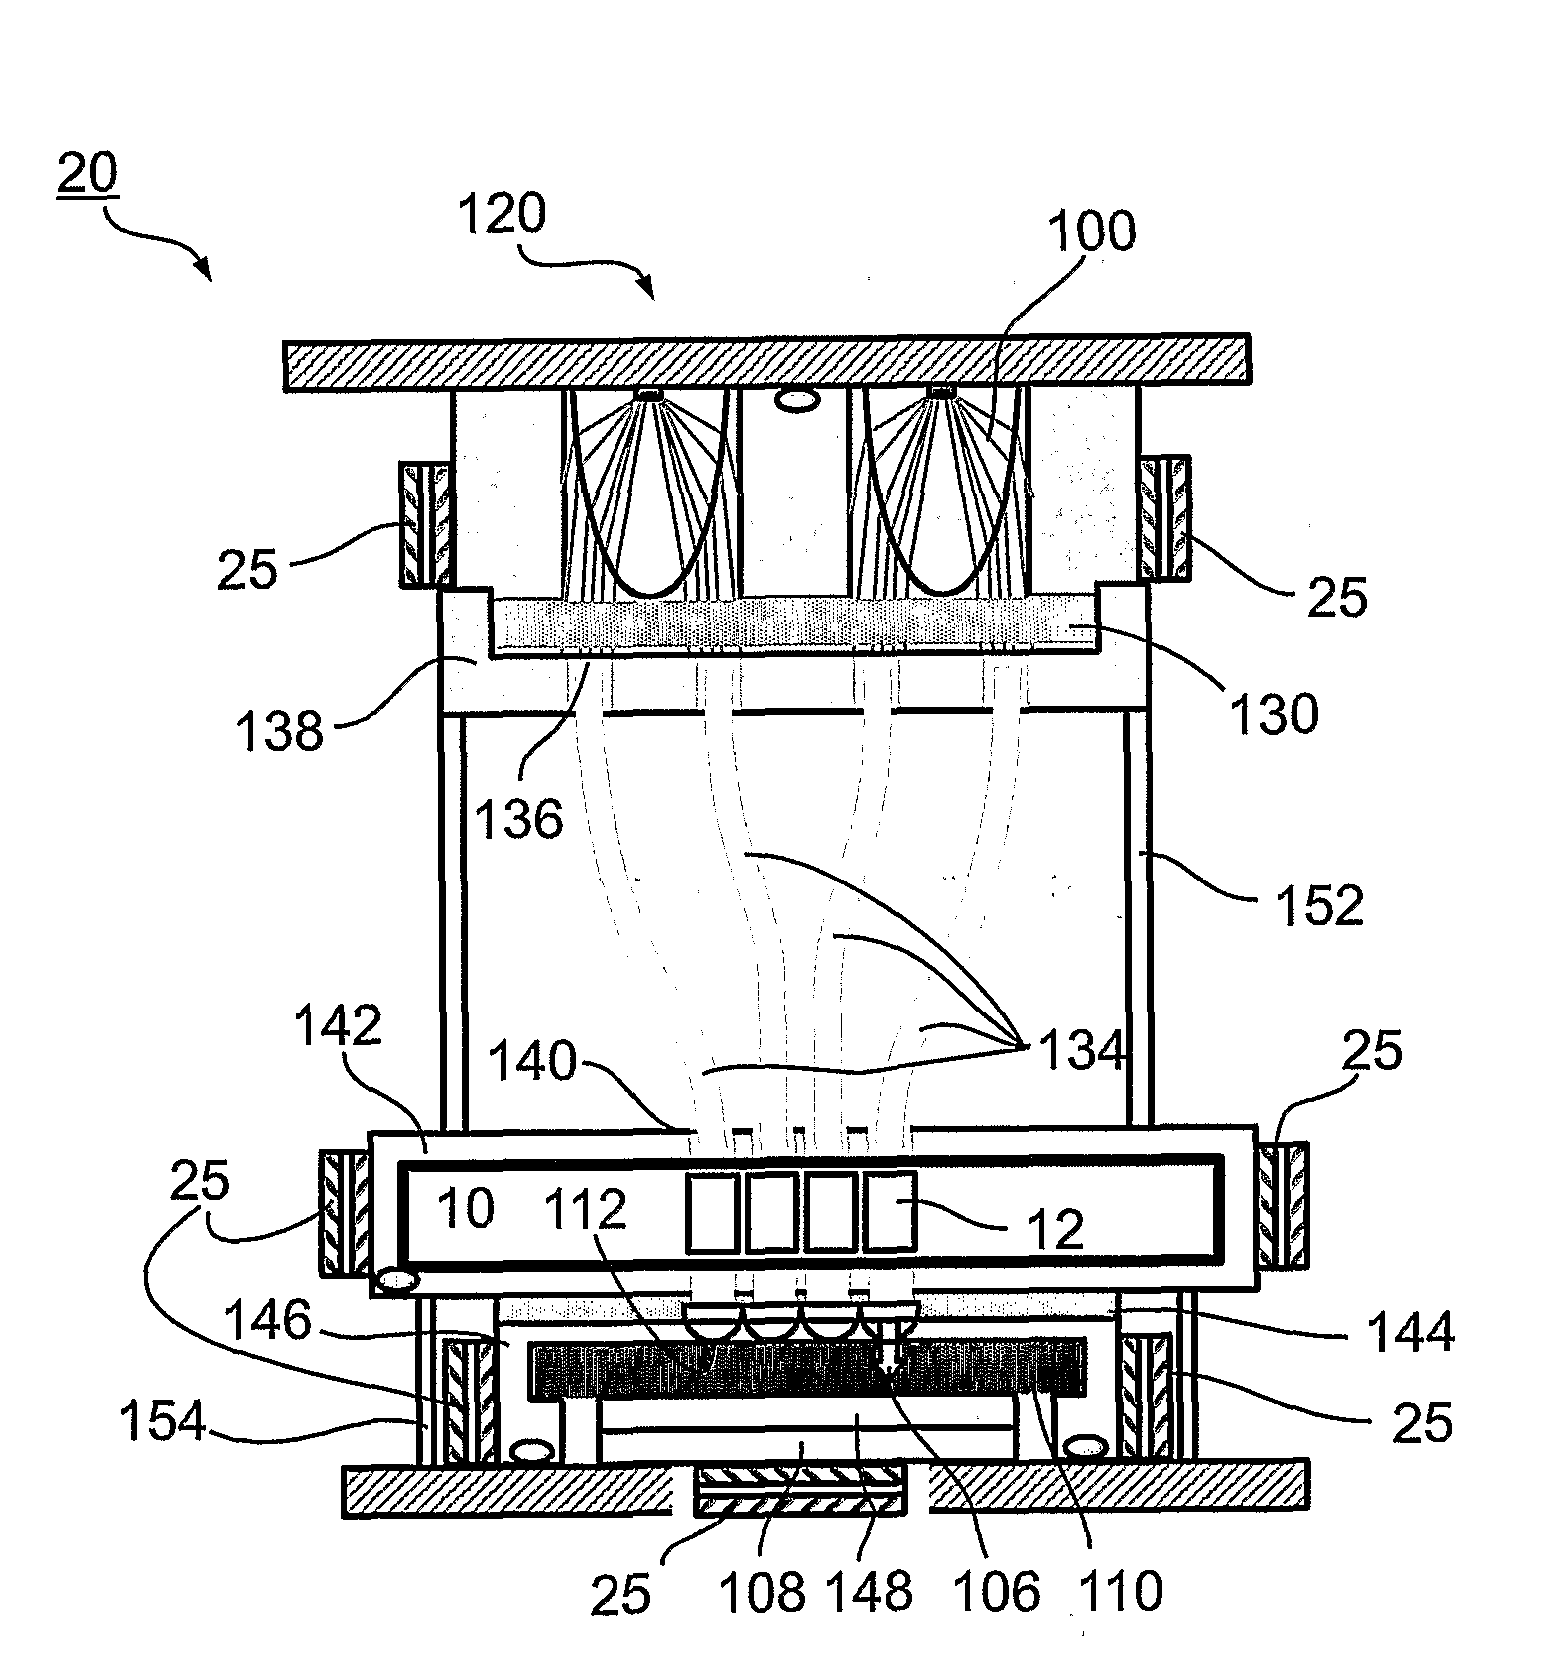 Method and System for Detecting Analytes